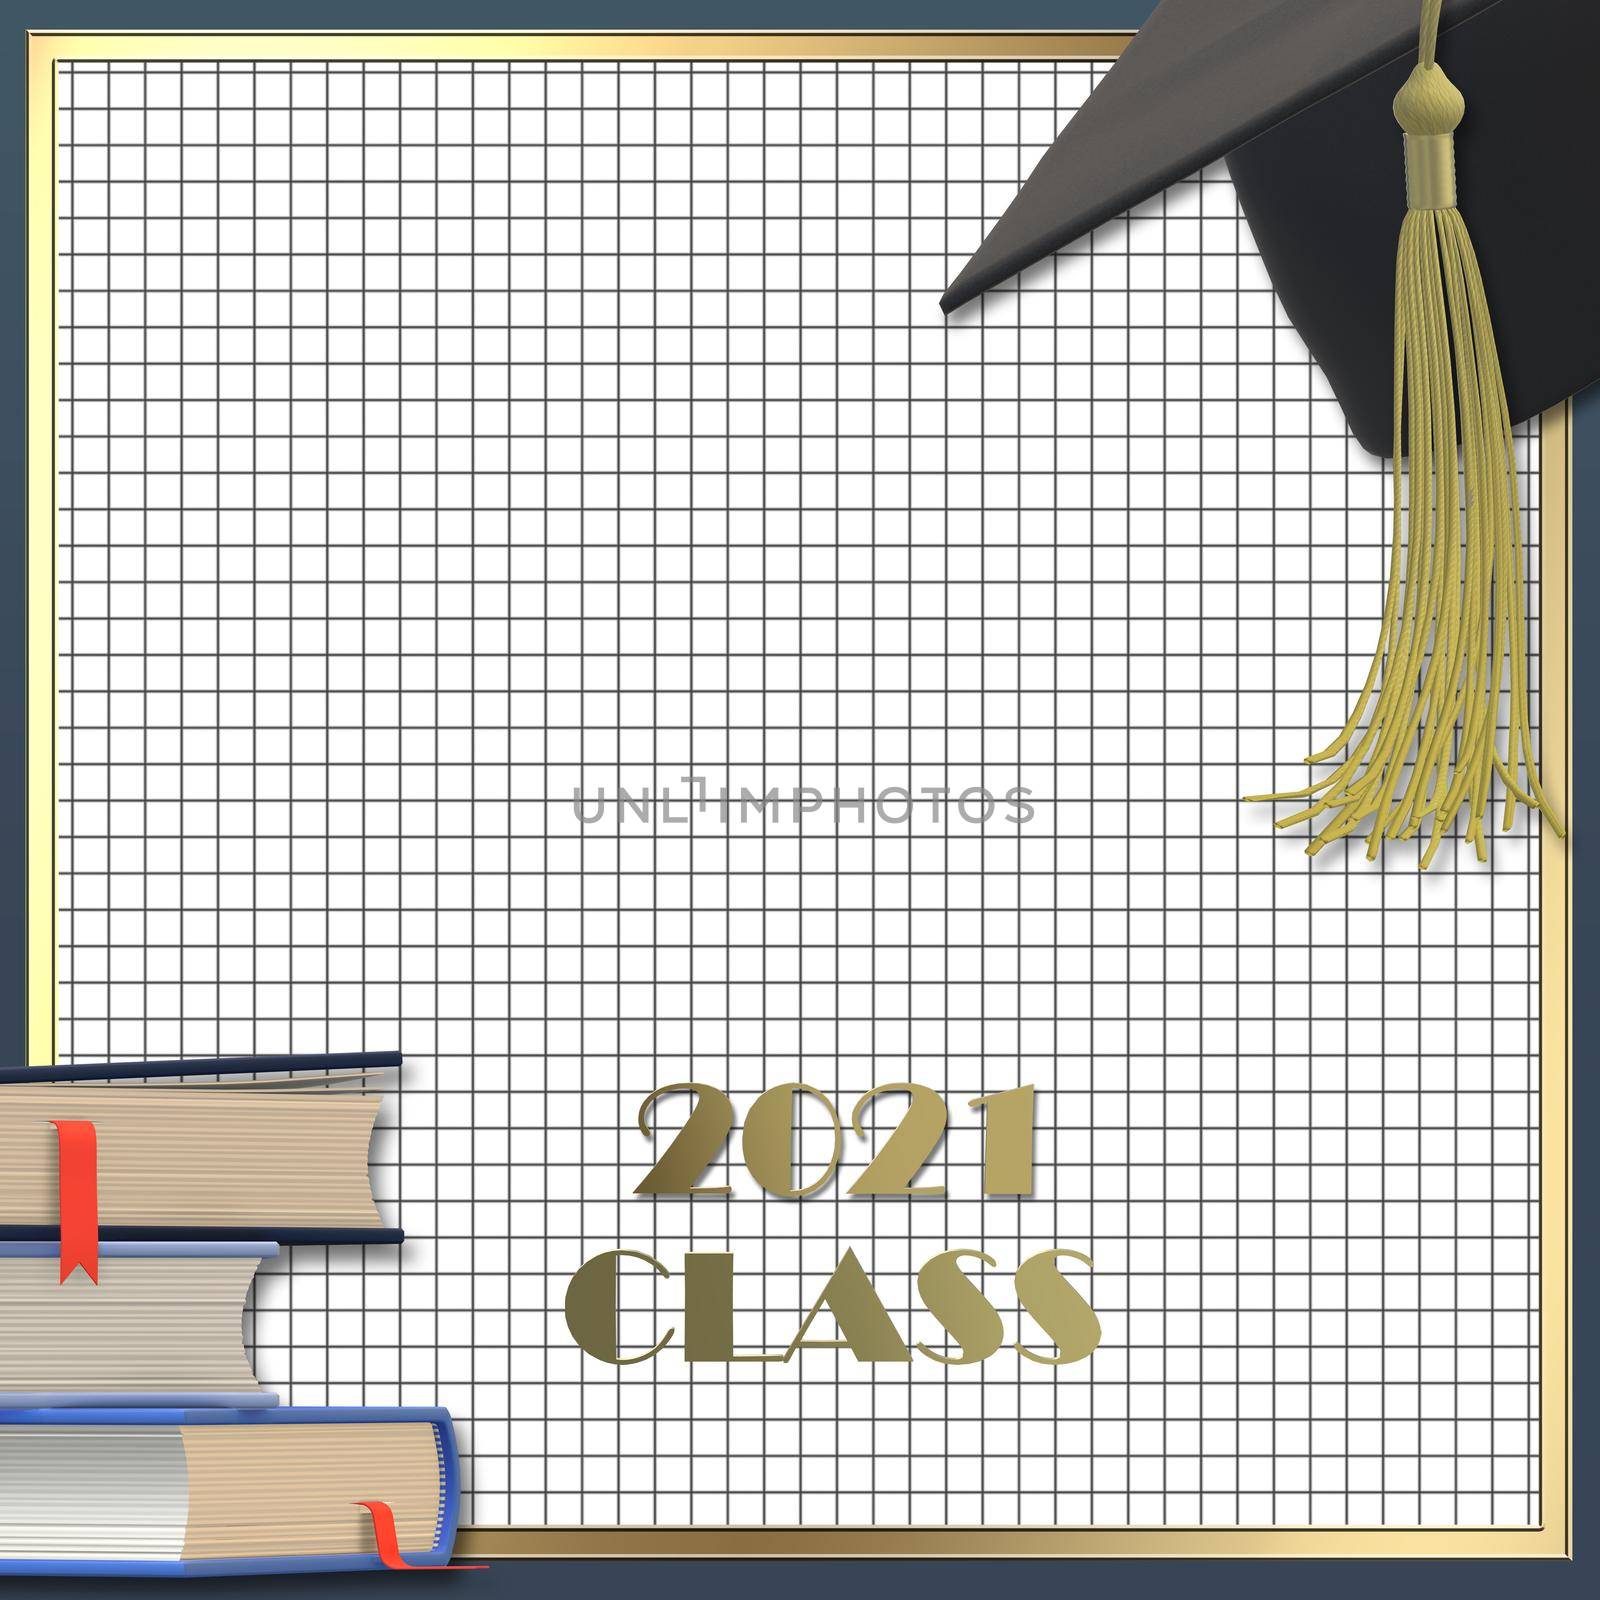 Graduation 2021 cap with tassel. Class of 2021 year on squared graph grid paper. Education concept, isolated. Place for text, copy space. 3D illustration